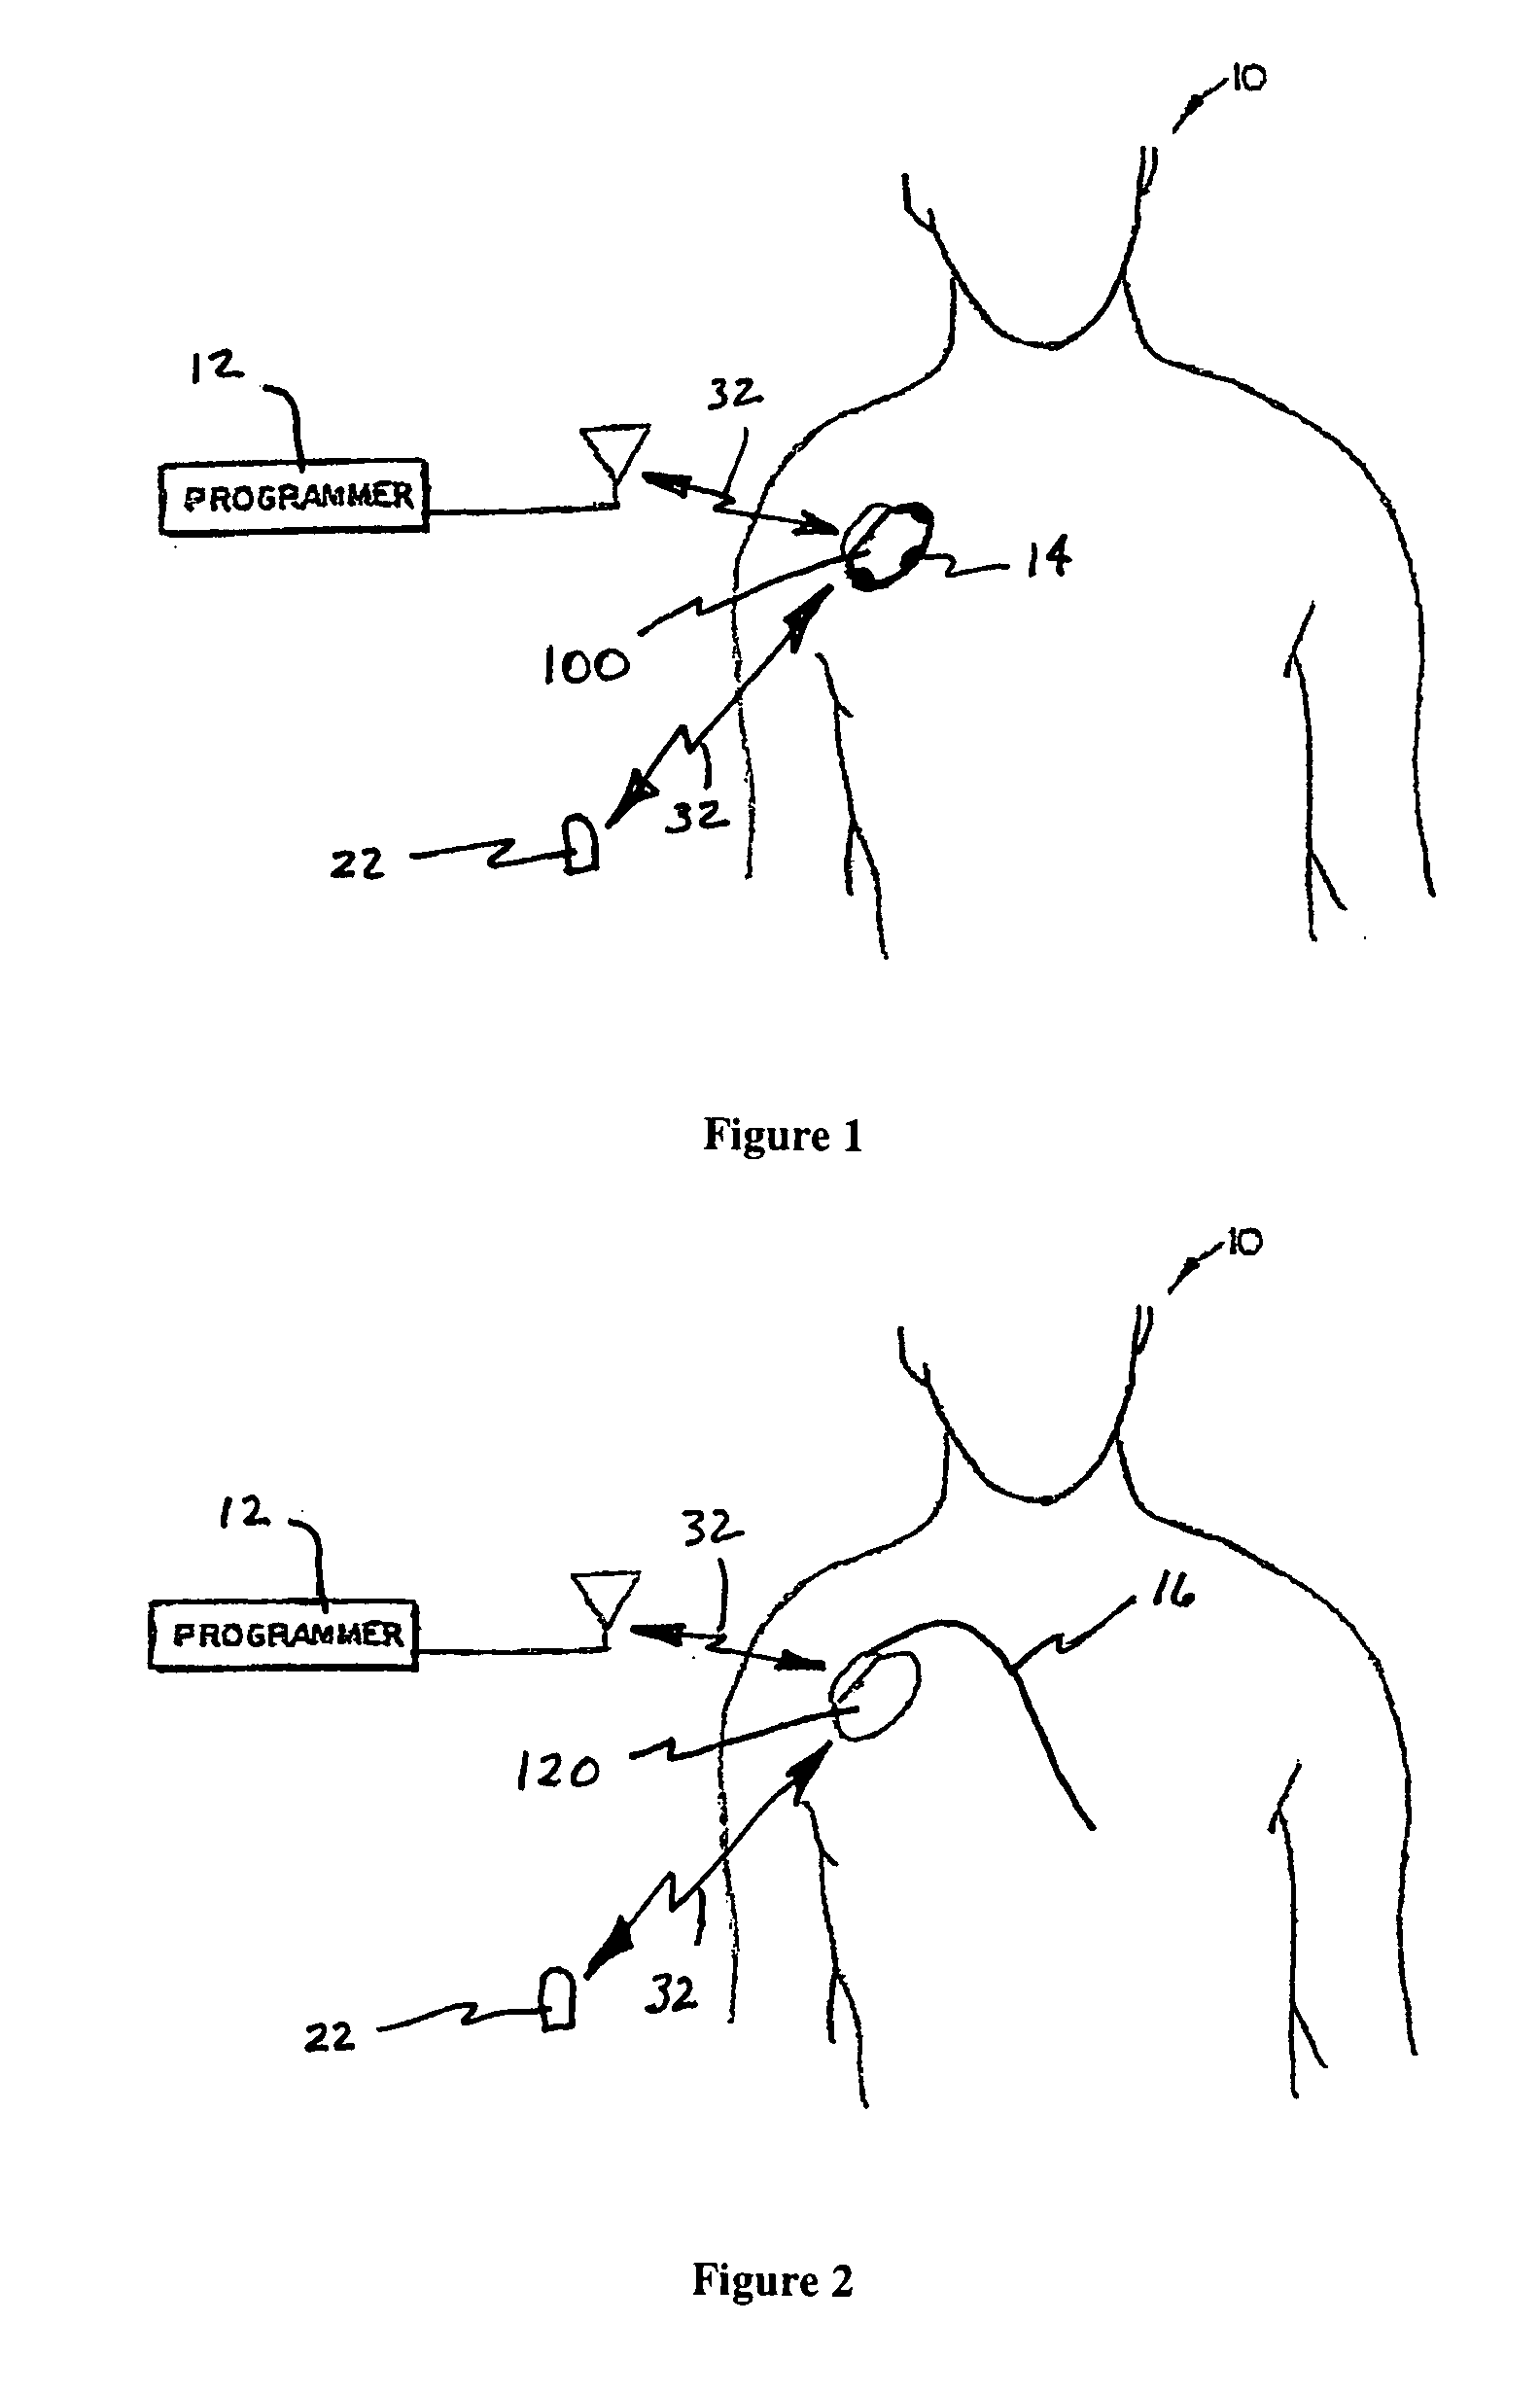 System and method for monitoring or treating nervous system disorders